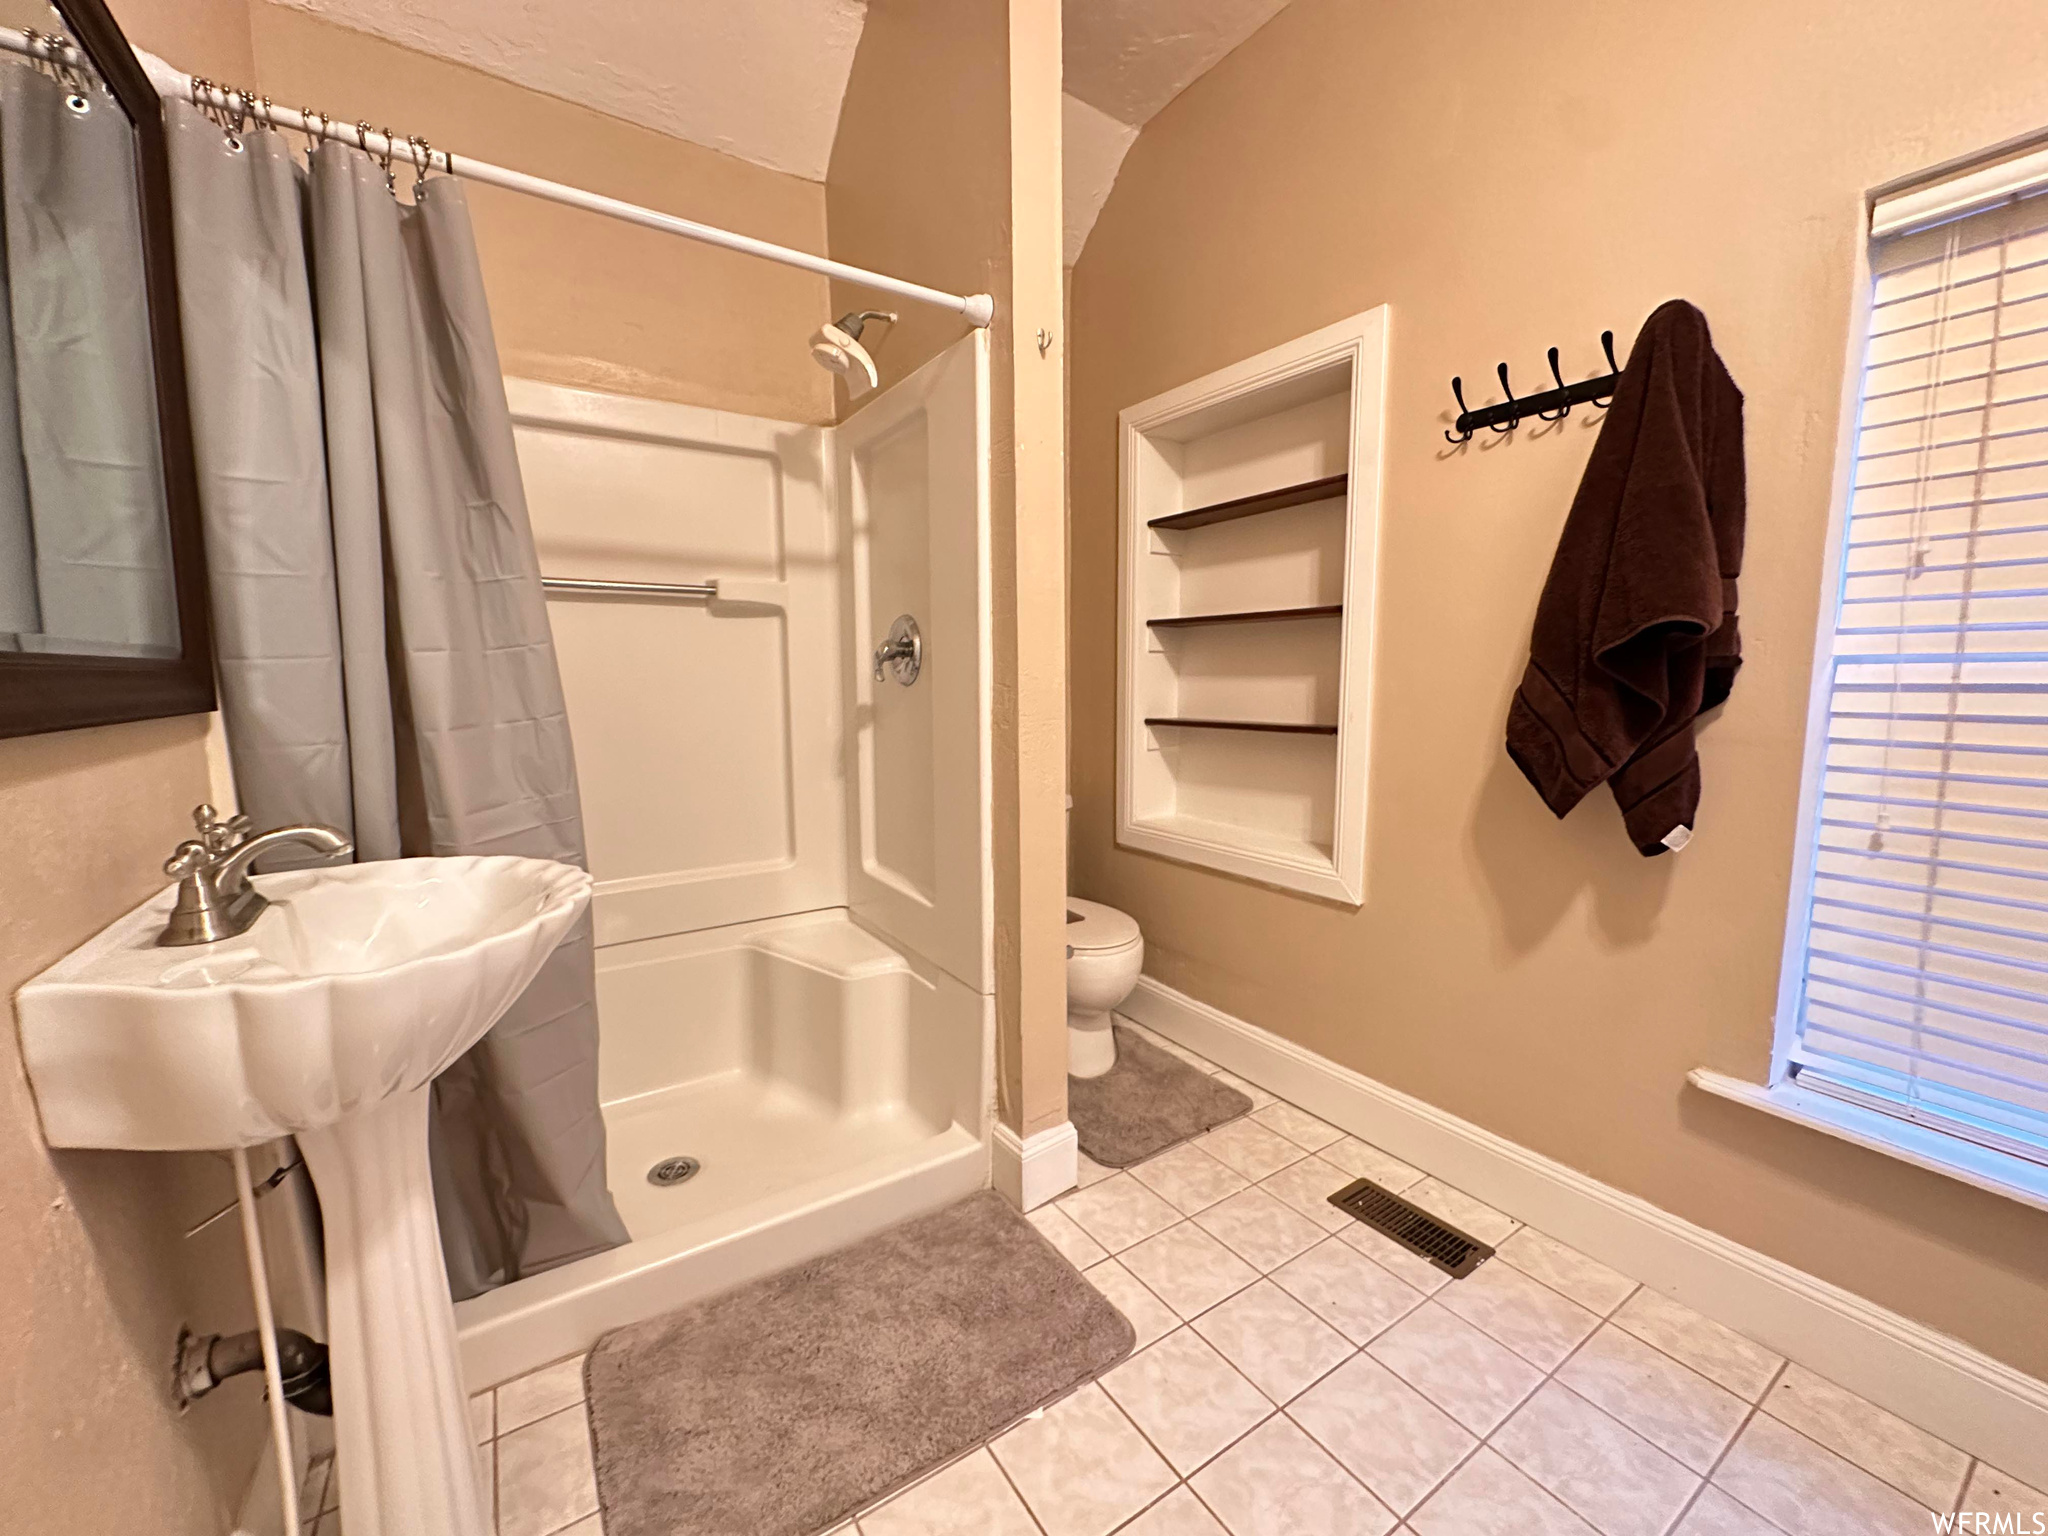 Bathroom featuring sink, toilet, vaulted ceiling, curtained shower, and tile floors